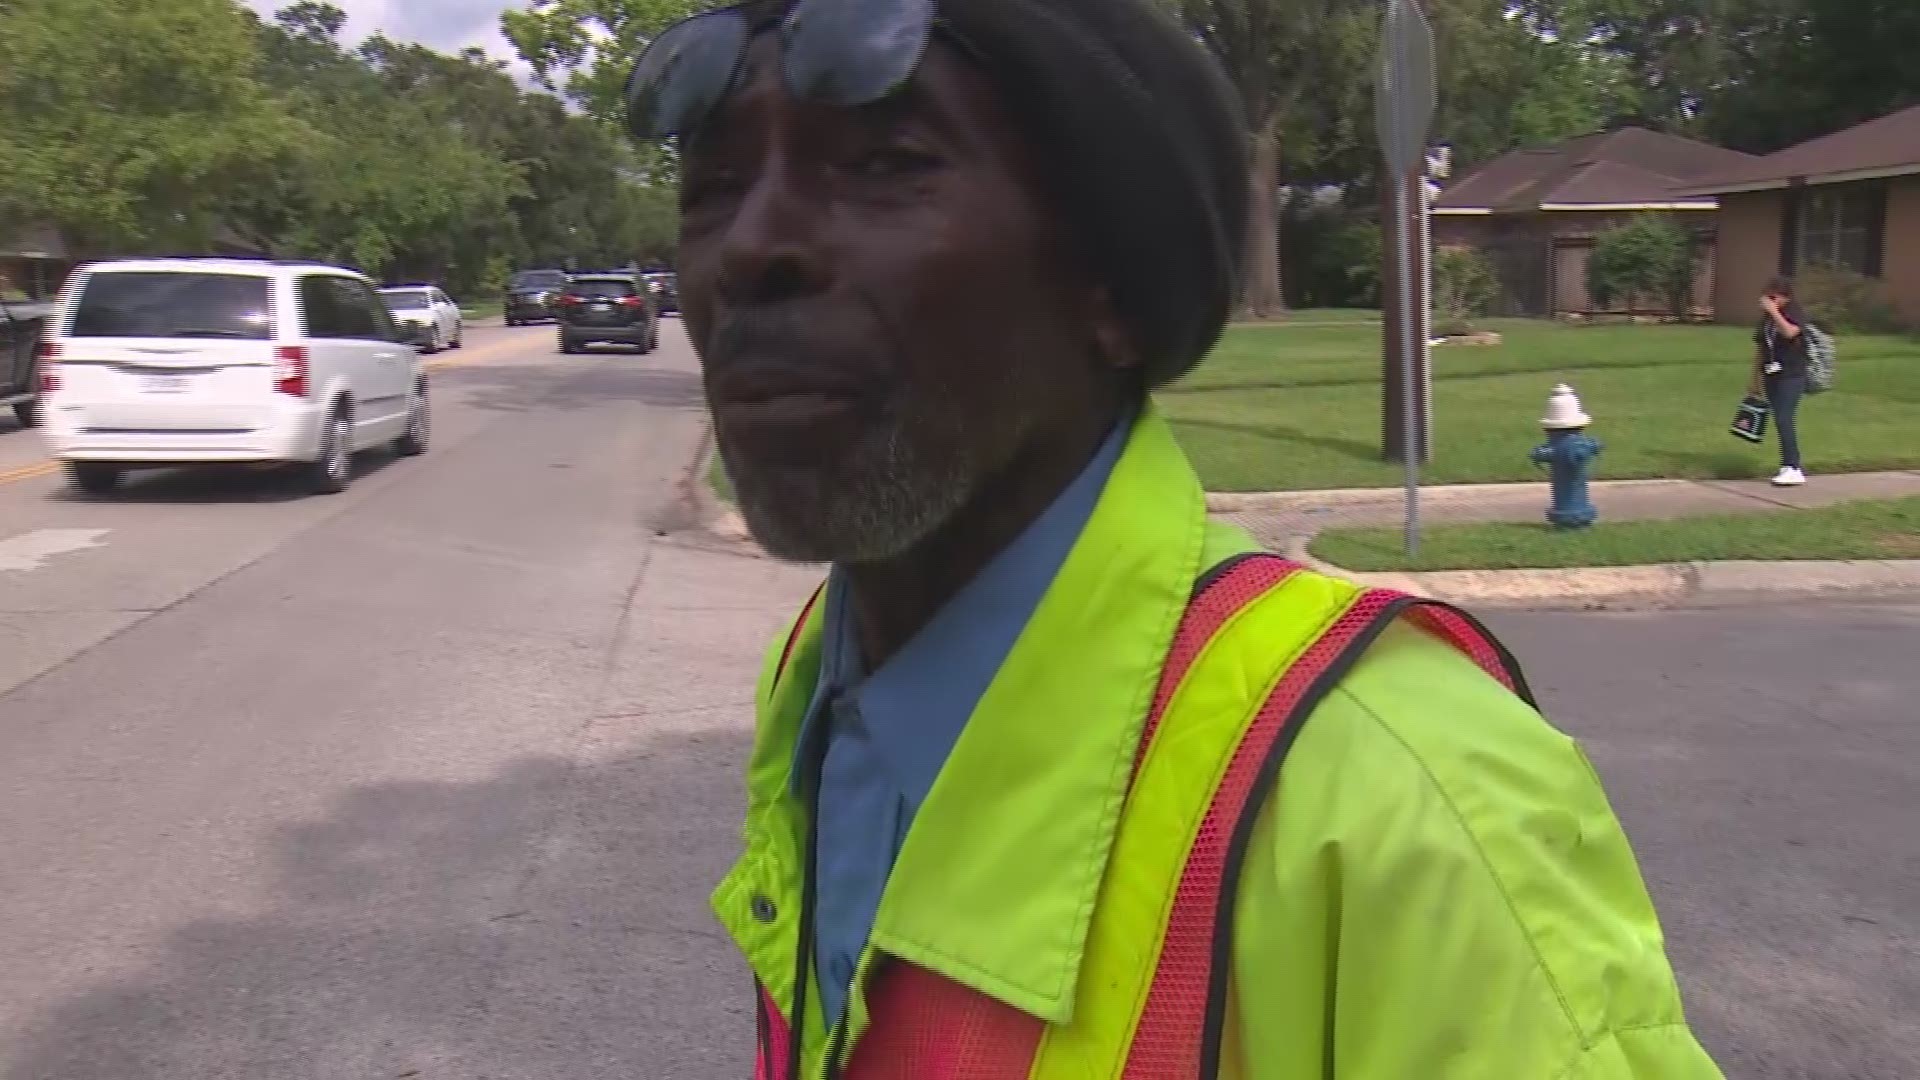 HISD is adding a crossing guard to an intersection in the Meyerland area after moms were stepping in to help kids cross the street.